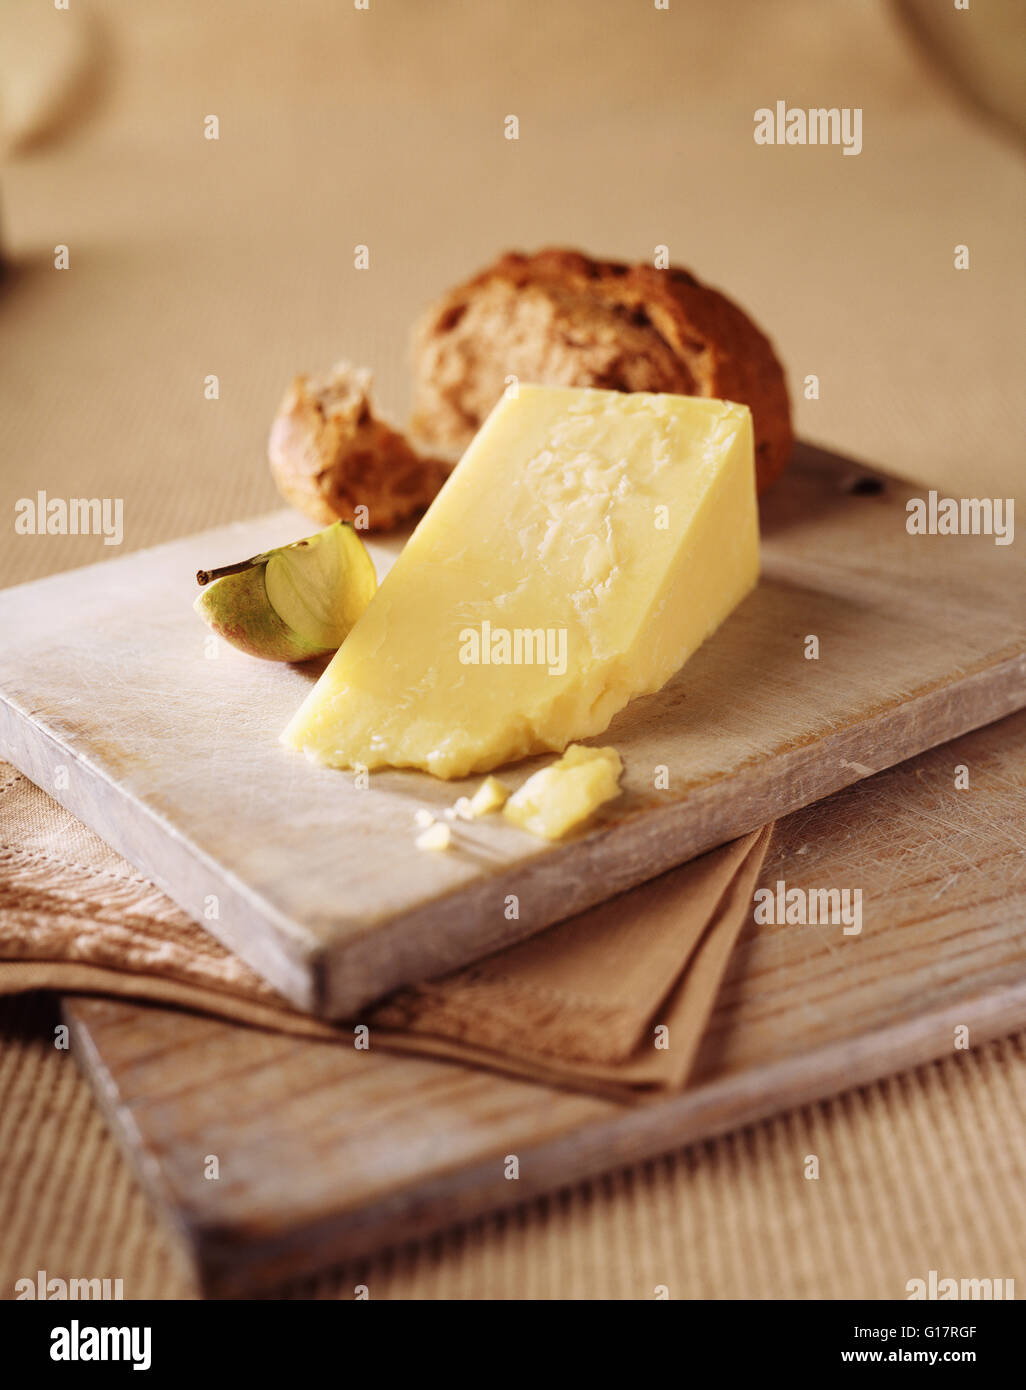 Wedge of mature cheese with apple slice and crusty wholemeal roll on wooden cutting board Stock Photo